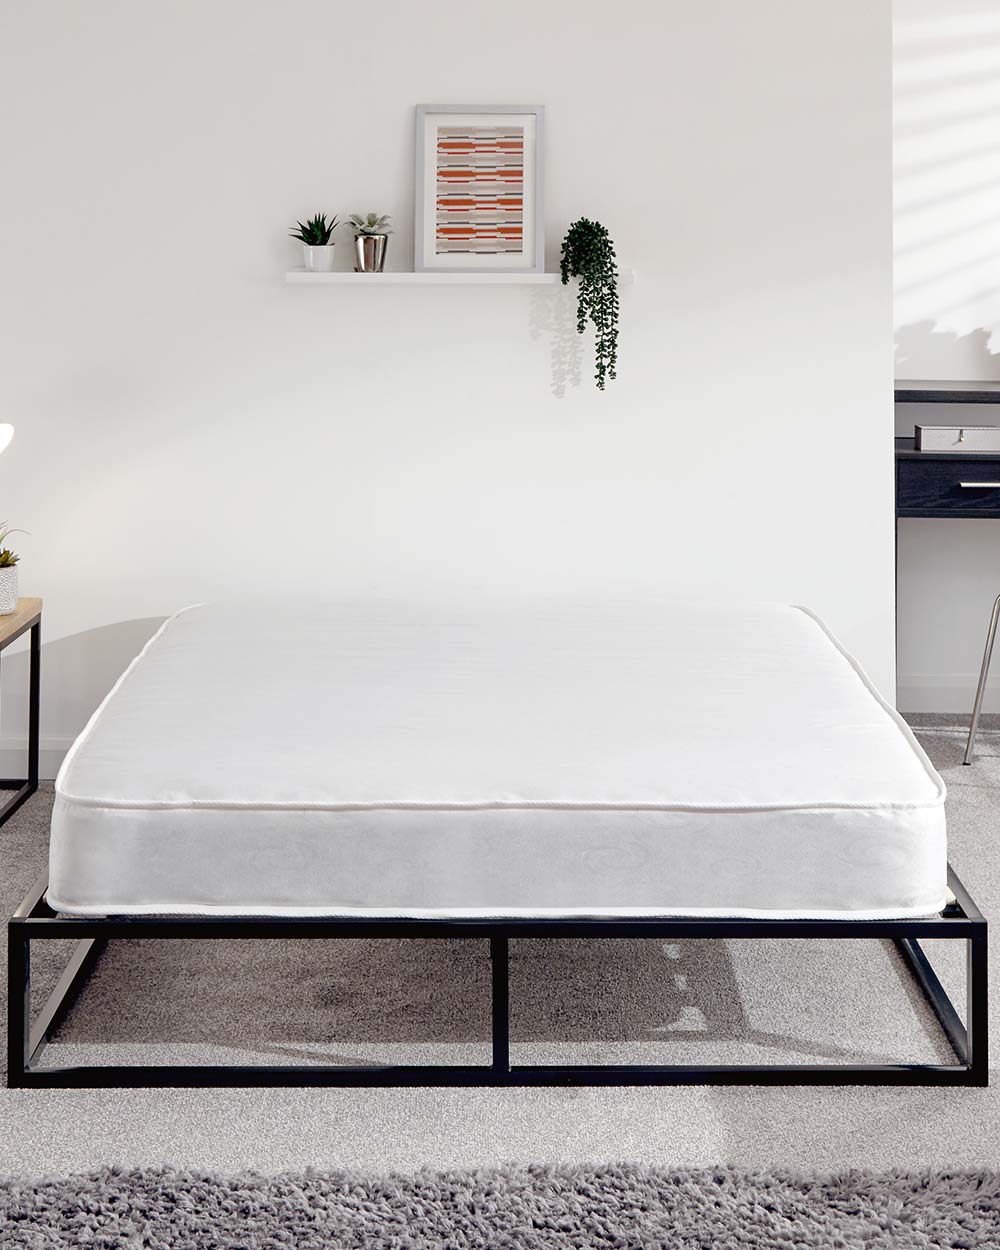 Platform double bed frame GFW lifestyle photo in a bedroom